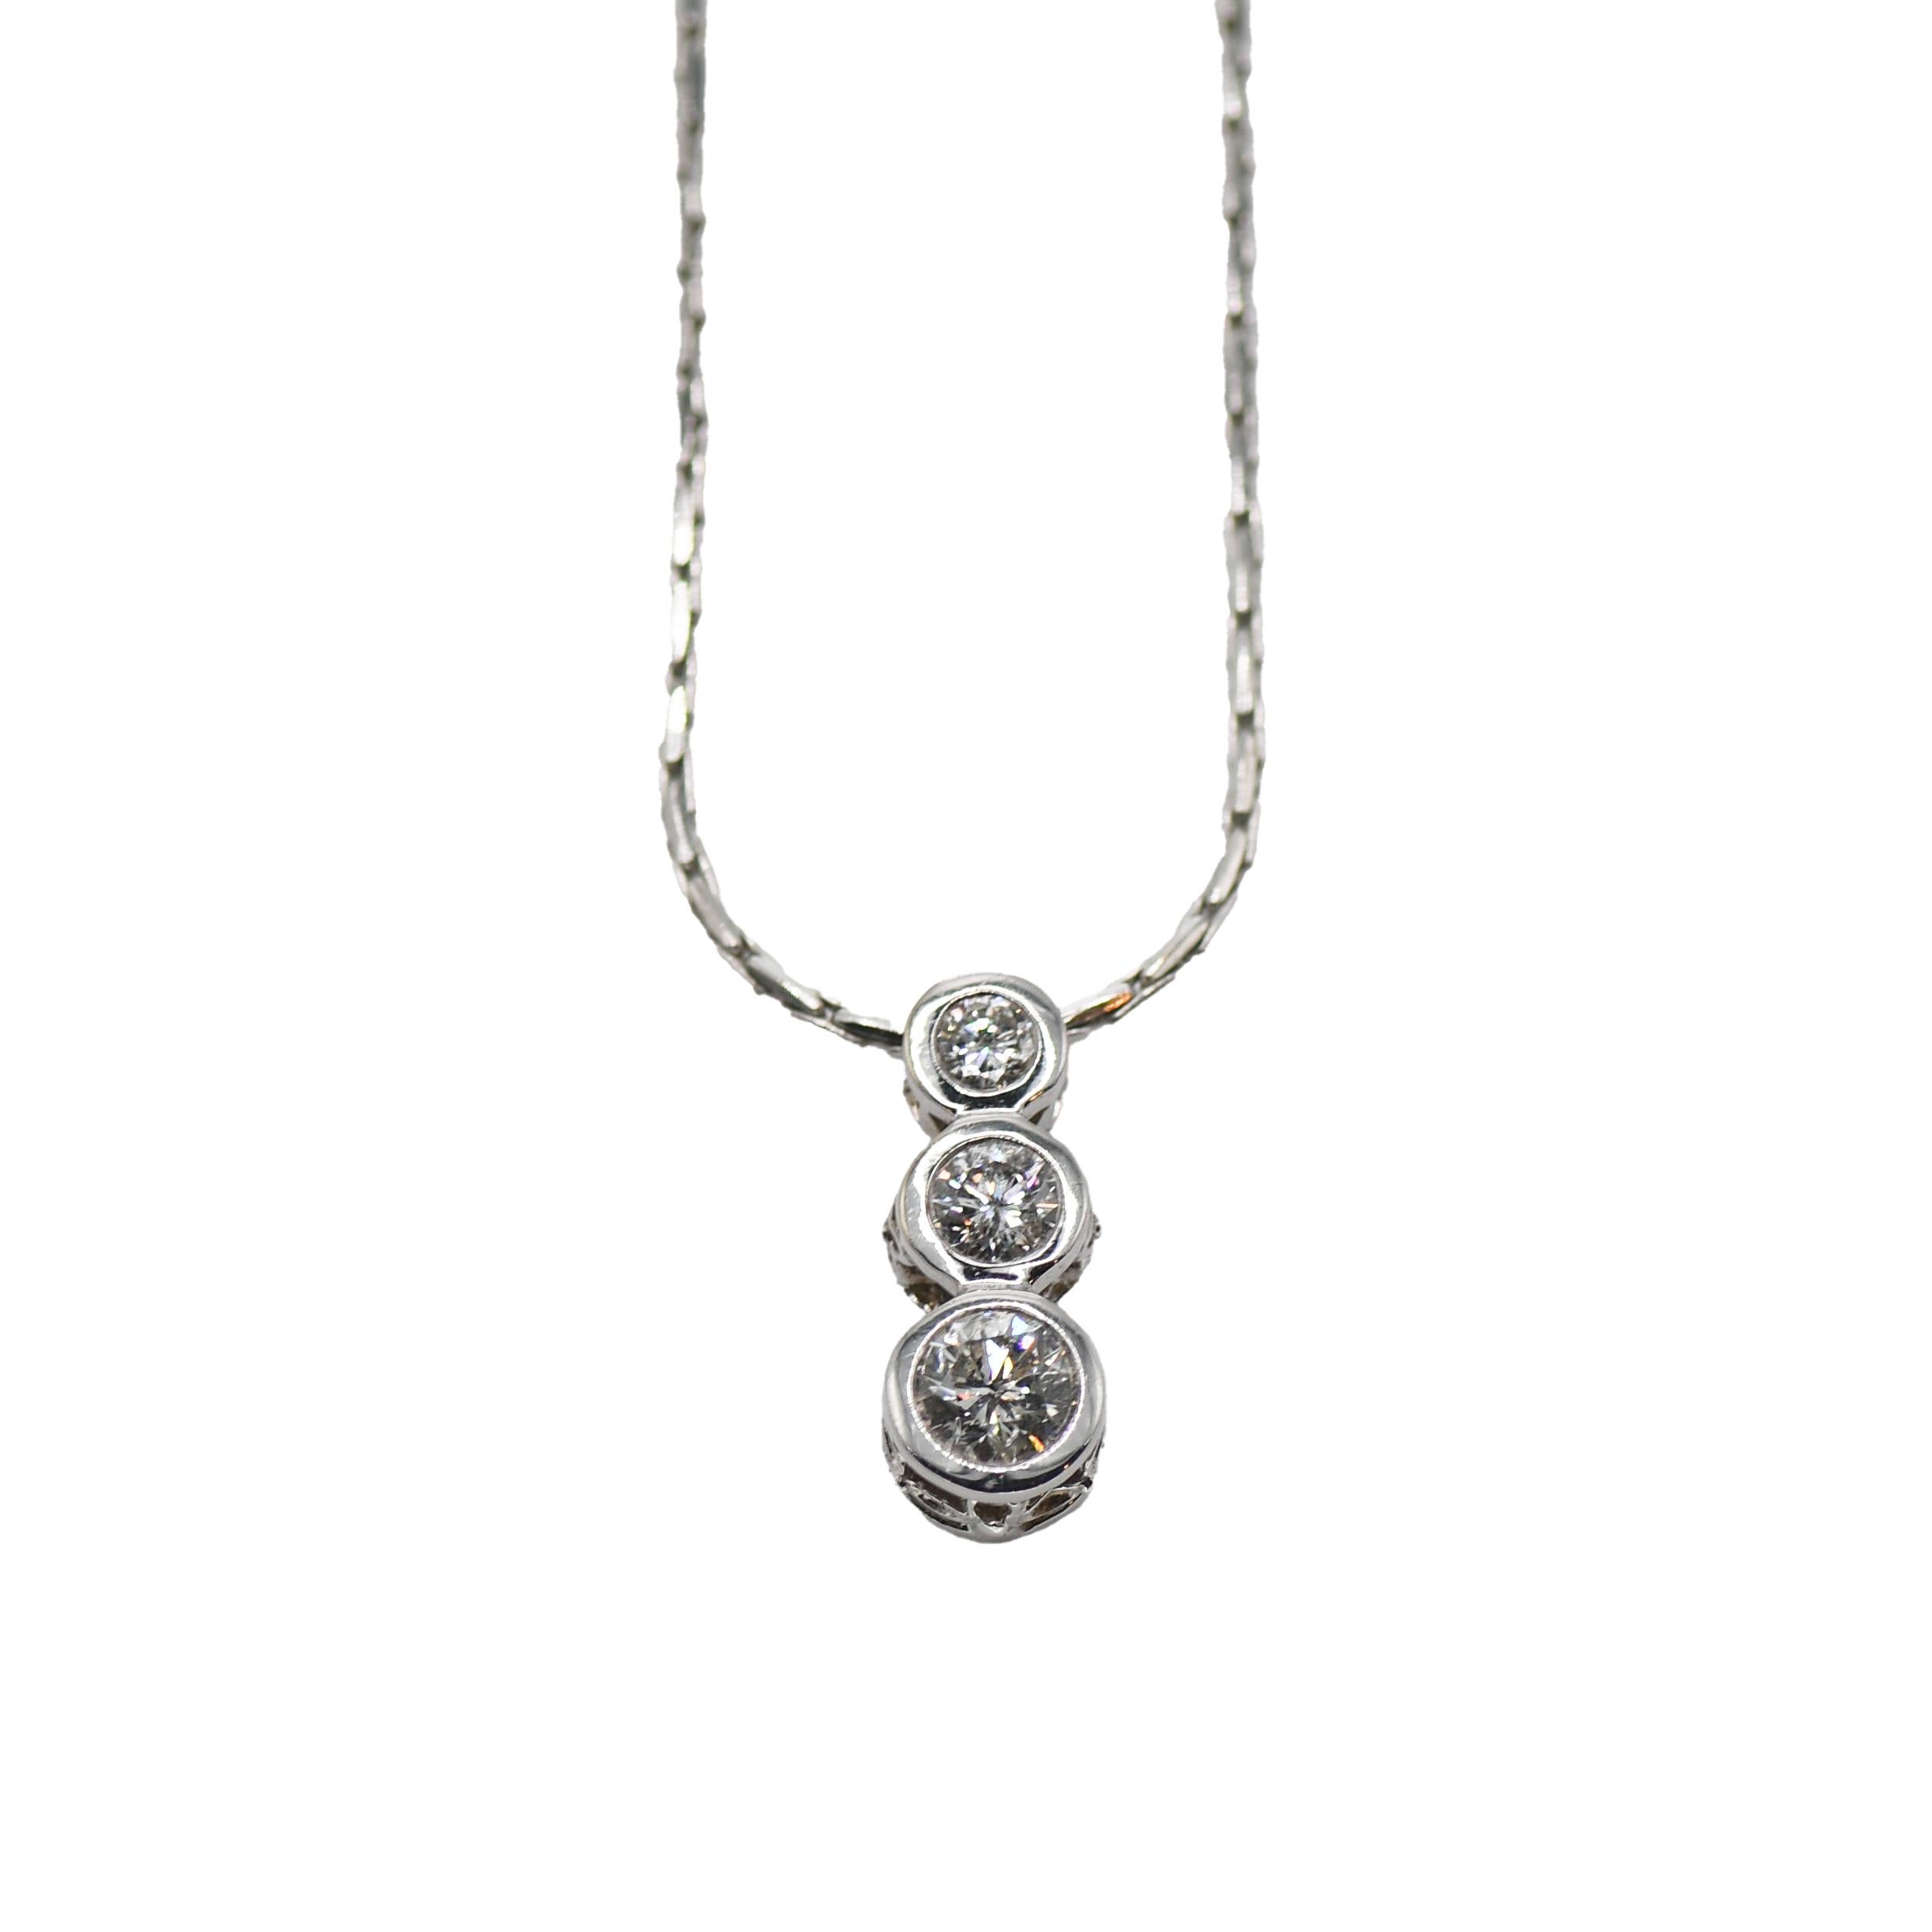 14K White Gold Three Stone Diamond Necklace

Elevate your elegance with a 14k white gold three-stone diamond pendant necklace, a masterpiece of timeless beauty and sophistication. This remarkable piece is a symbol of enduring love, featuring three